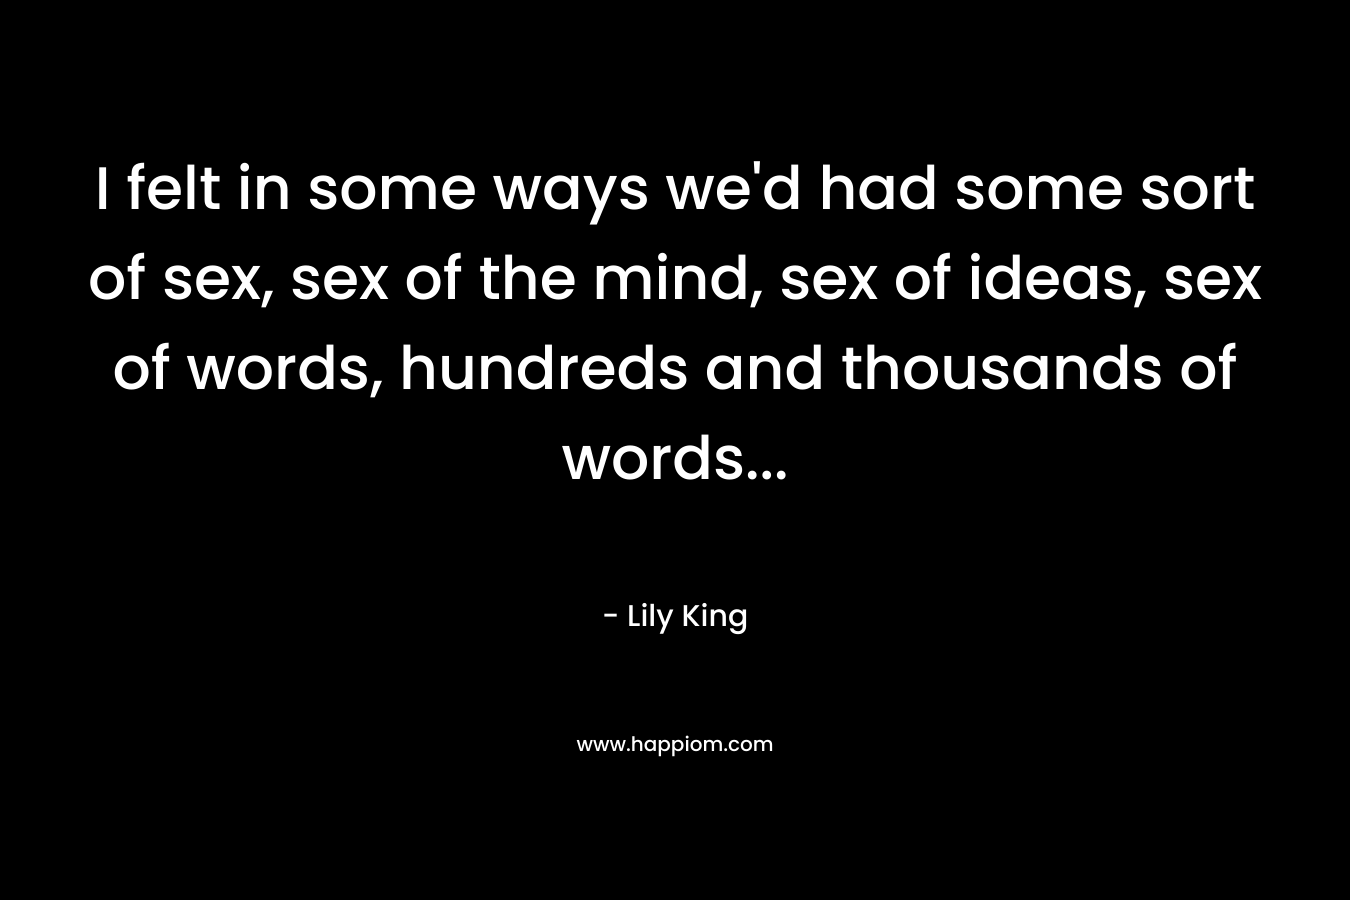 I felt in some ways we’d had some sort of sex, sex of the mind, sex of ideas, sex of words, hundreds and thousands of words… – Lily King